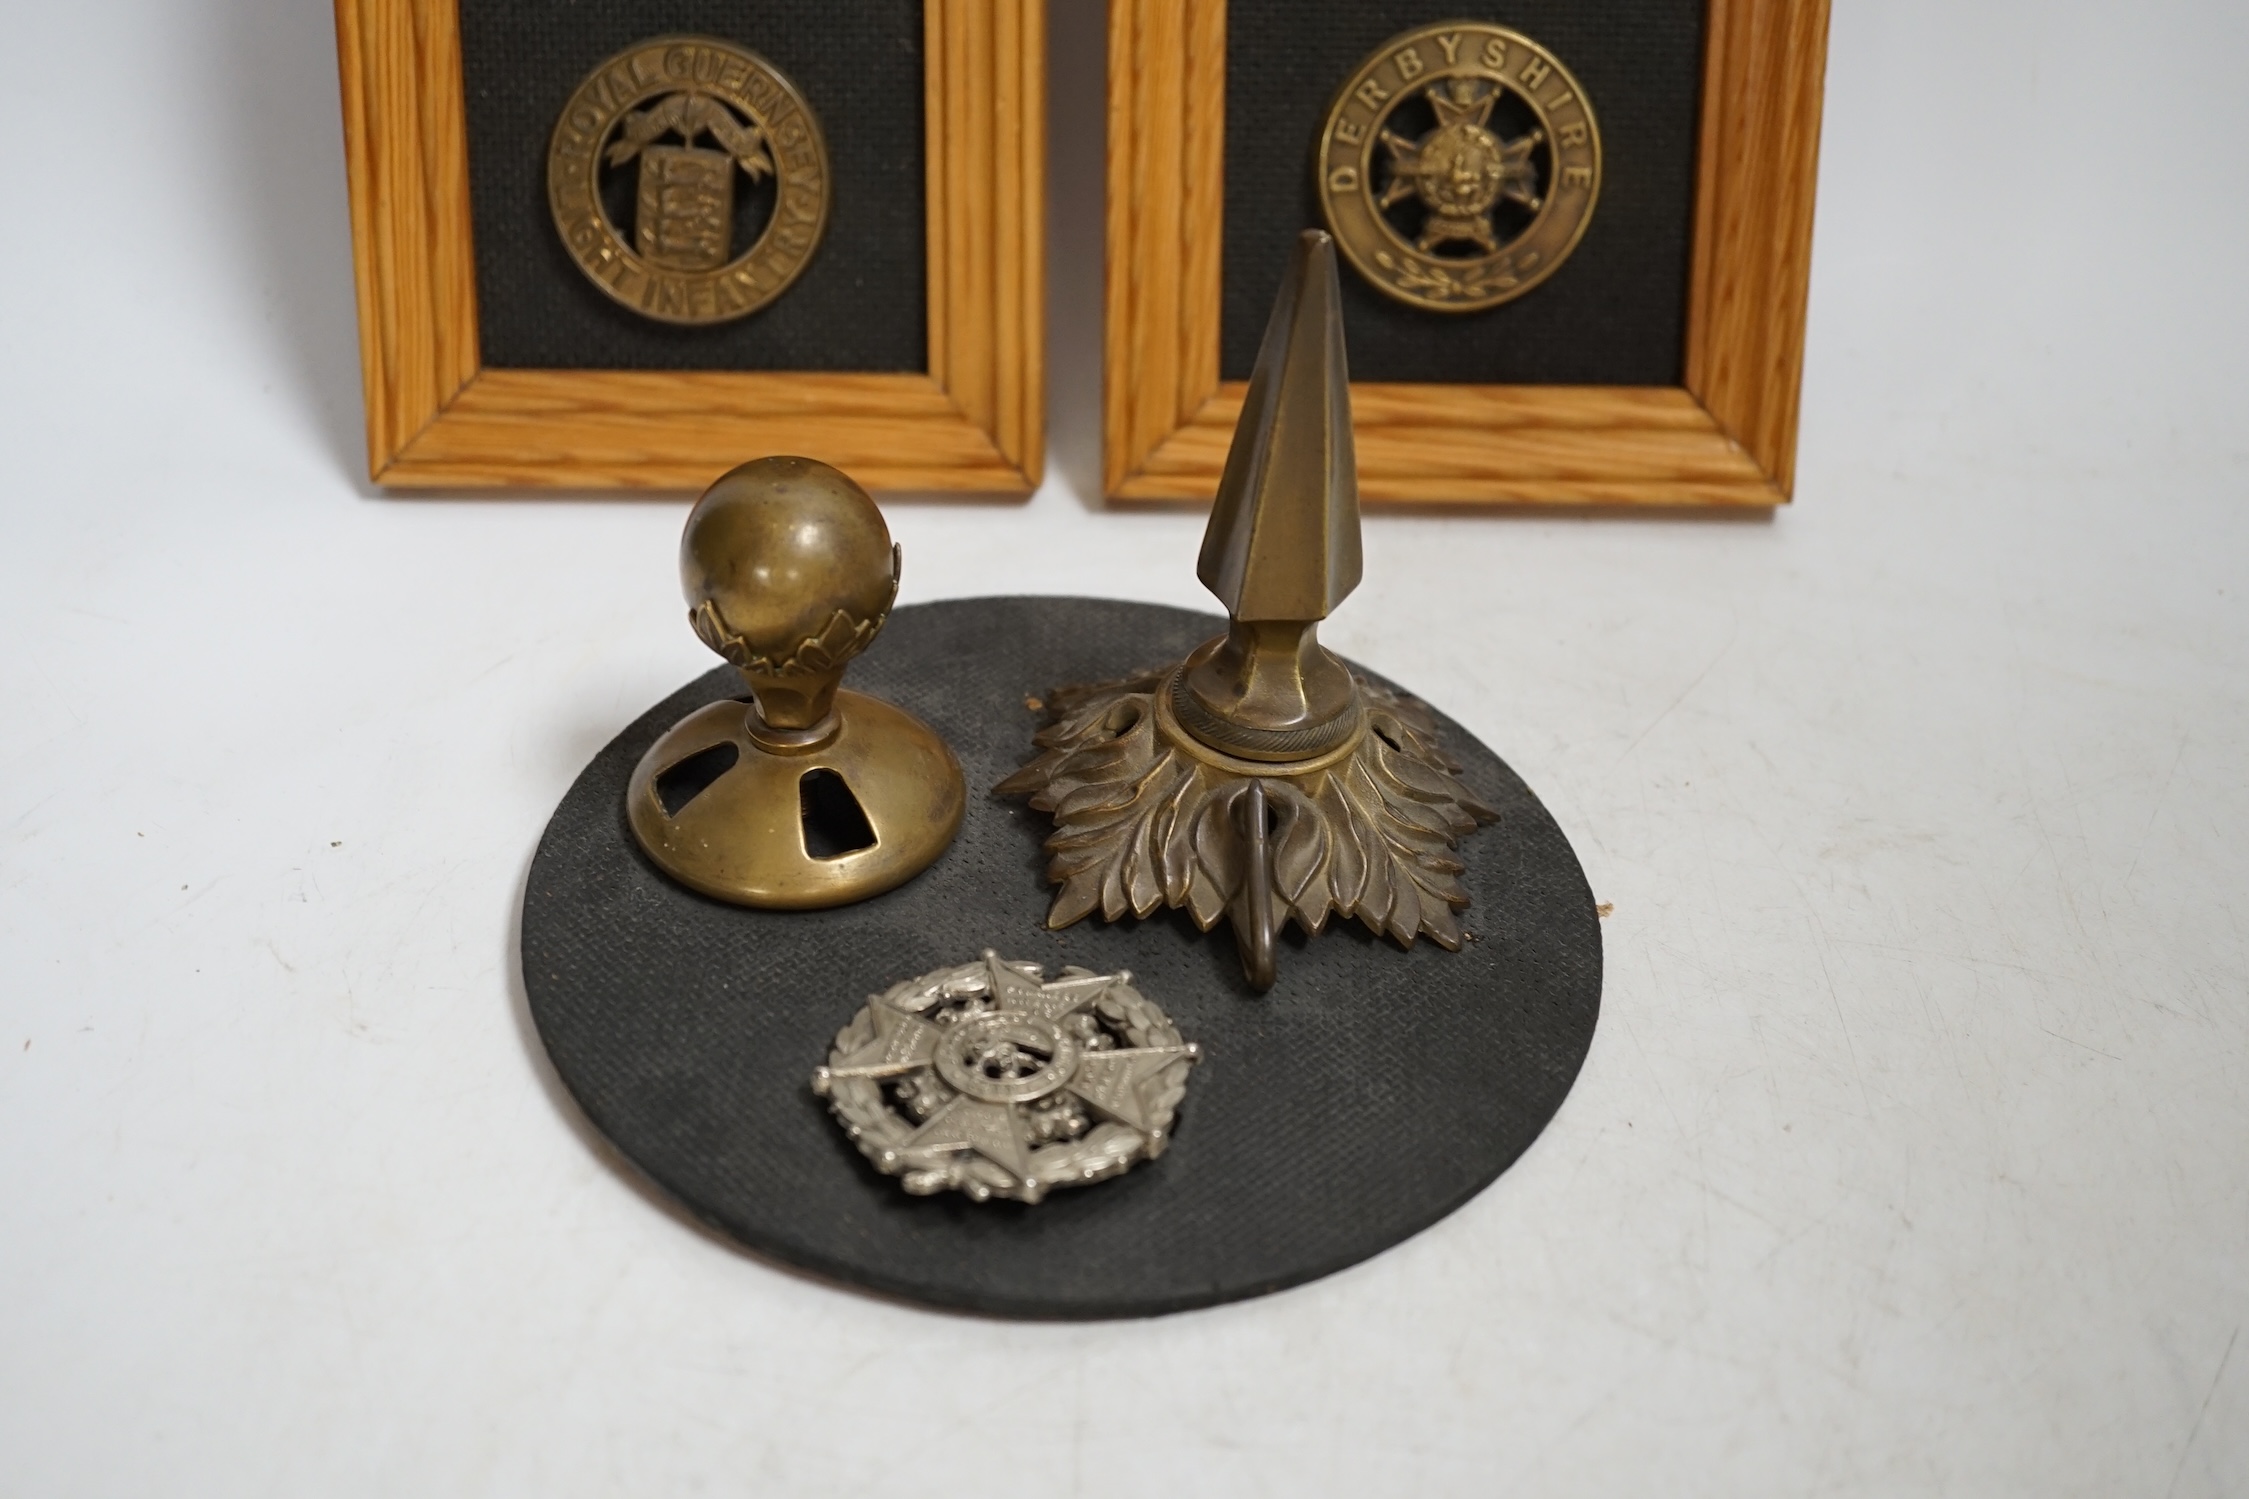 Six military helmet plates mounted on two boards, together with two helmet spikes and a cap badge, including; the Yorkshire Regiment, the Royal Guernsey Light Infantry, the Loyal North Lancashire, the Lincolnshire Regime